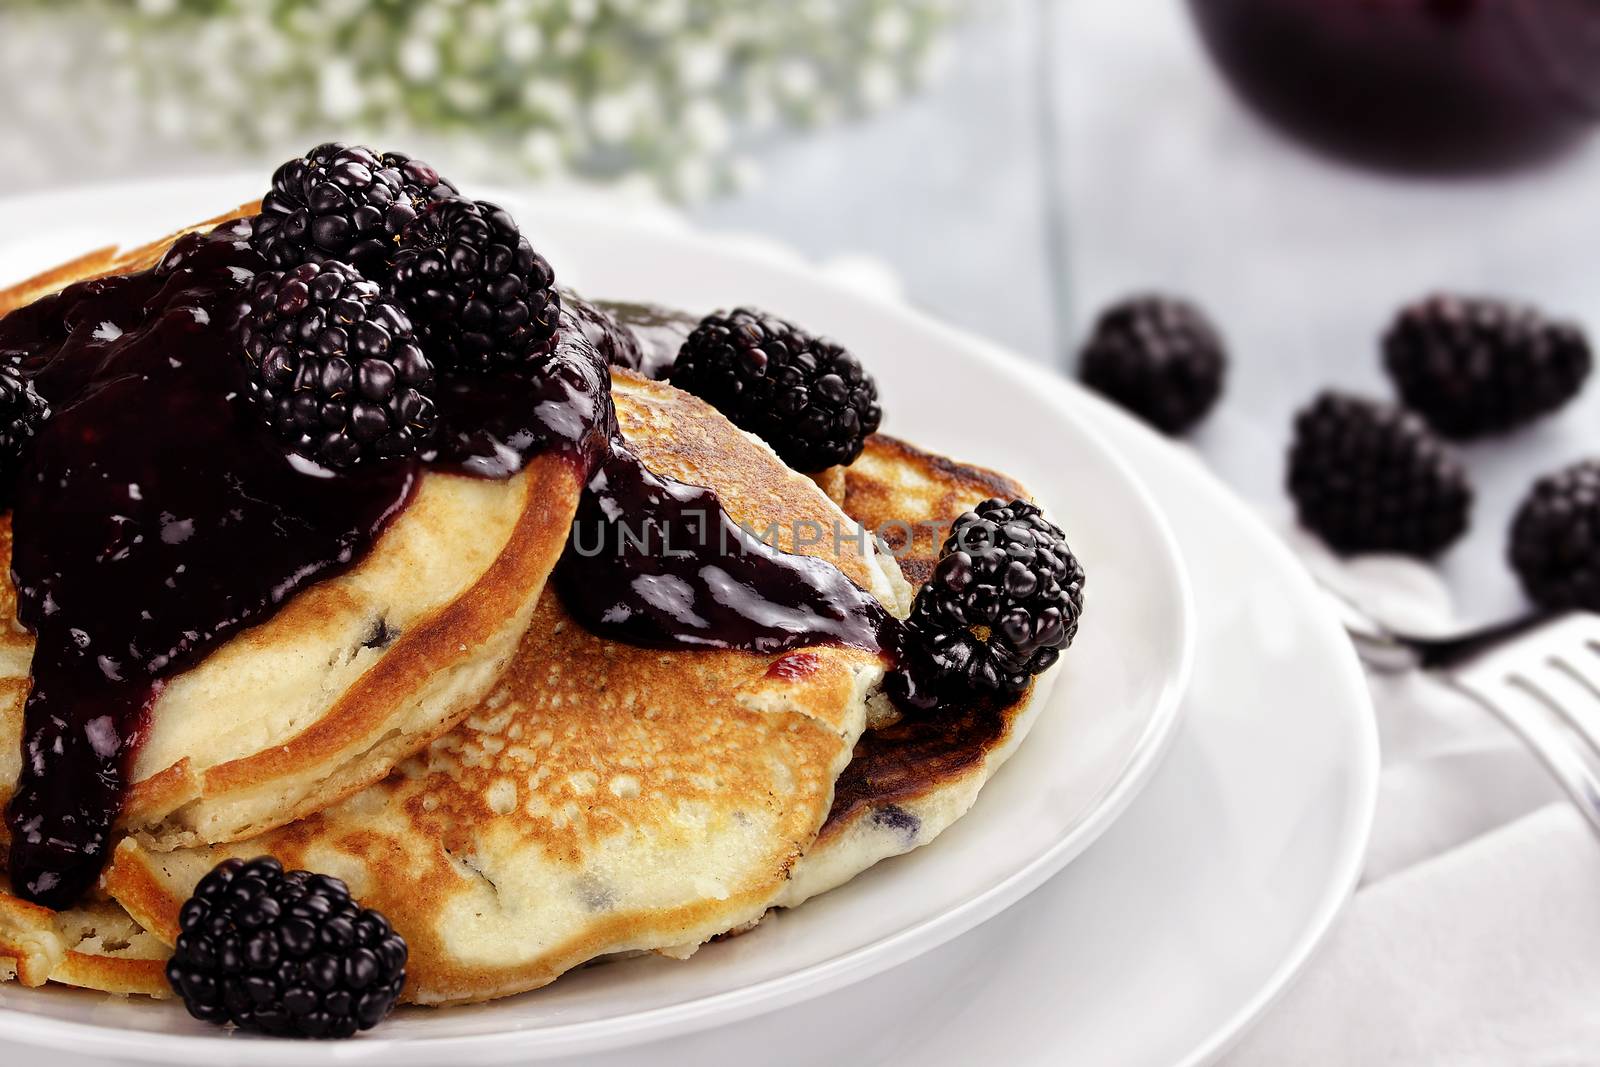 Delicious golden pancakes with fresh blackberries and blackberry jam. Extreme shallow depth of field.